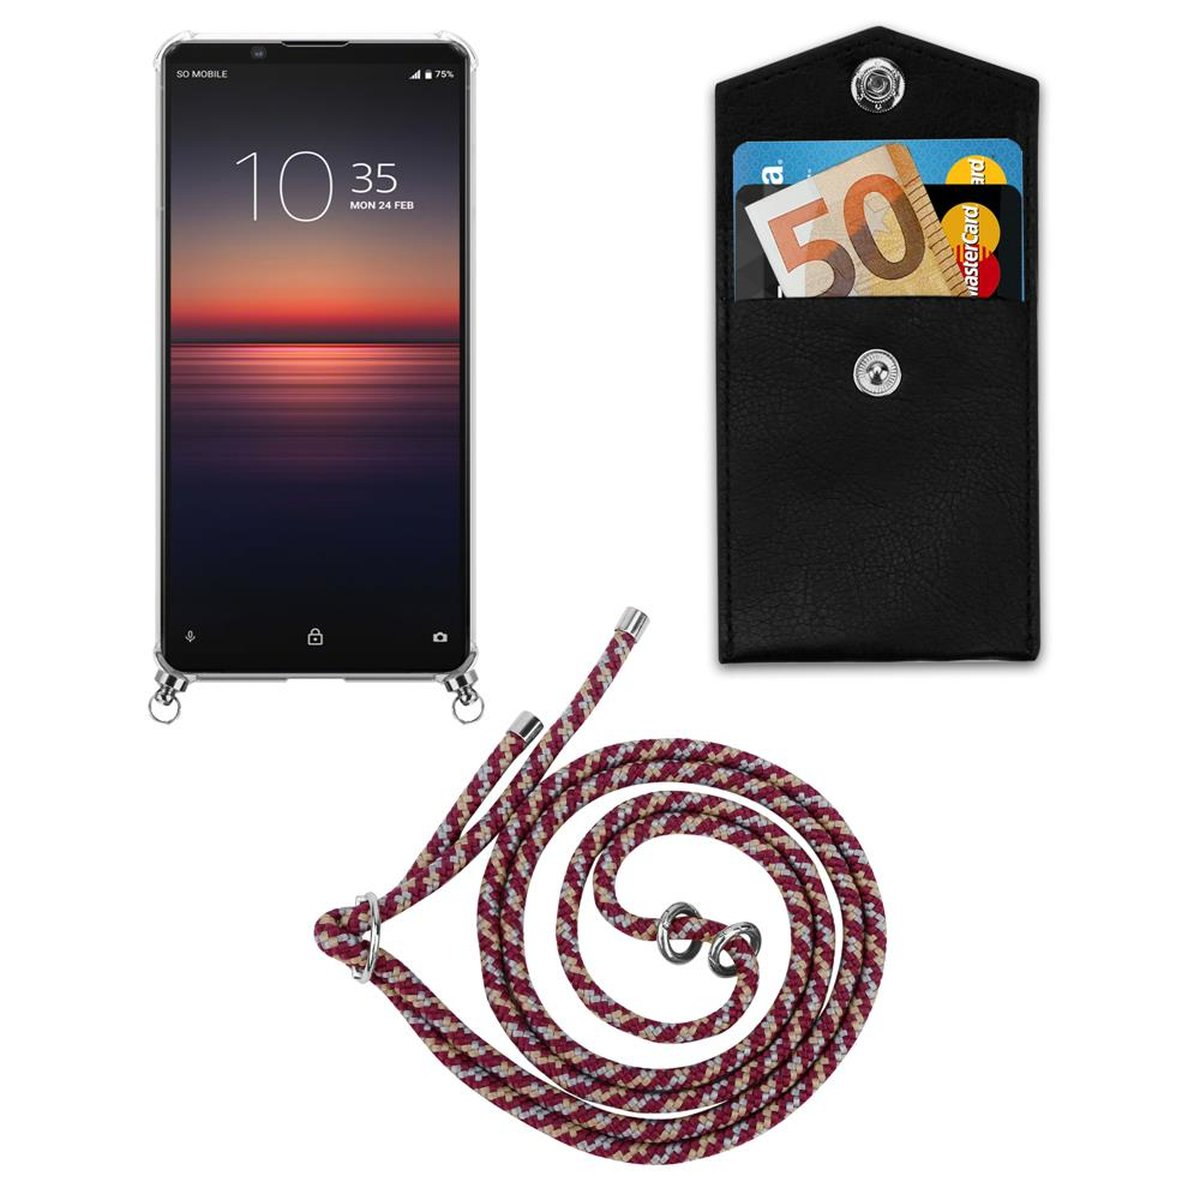 abnehmbarer und ROT Xperia Ringen, Kette Silber 1 mit Handy CADORABO Band WEIß GELB Hülle, Sony, II, Backcover, Kordel